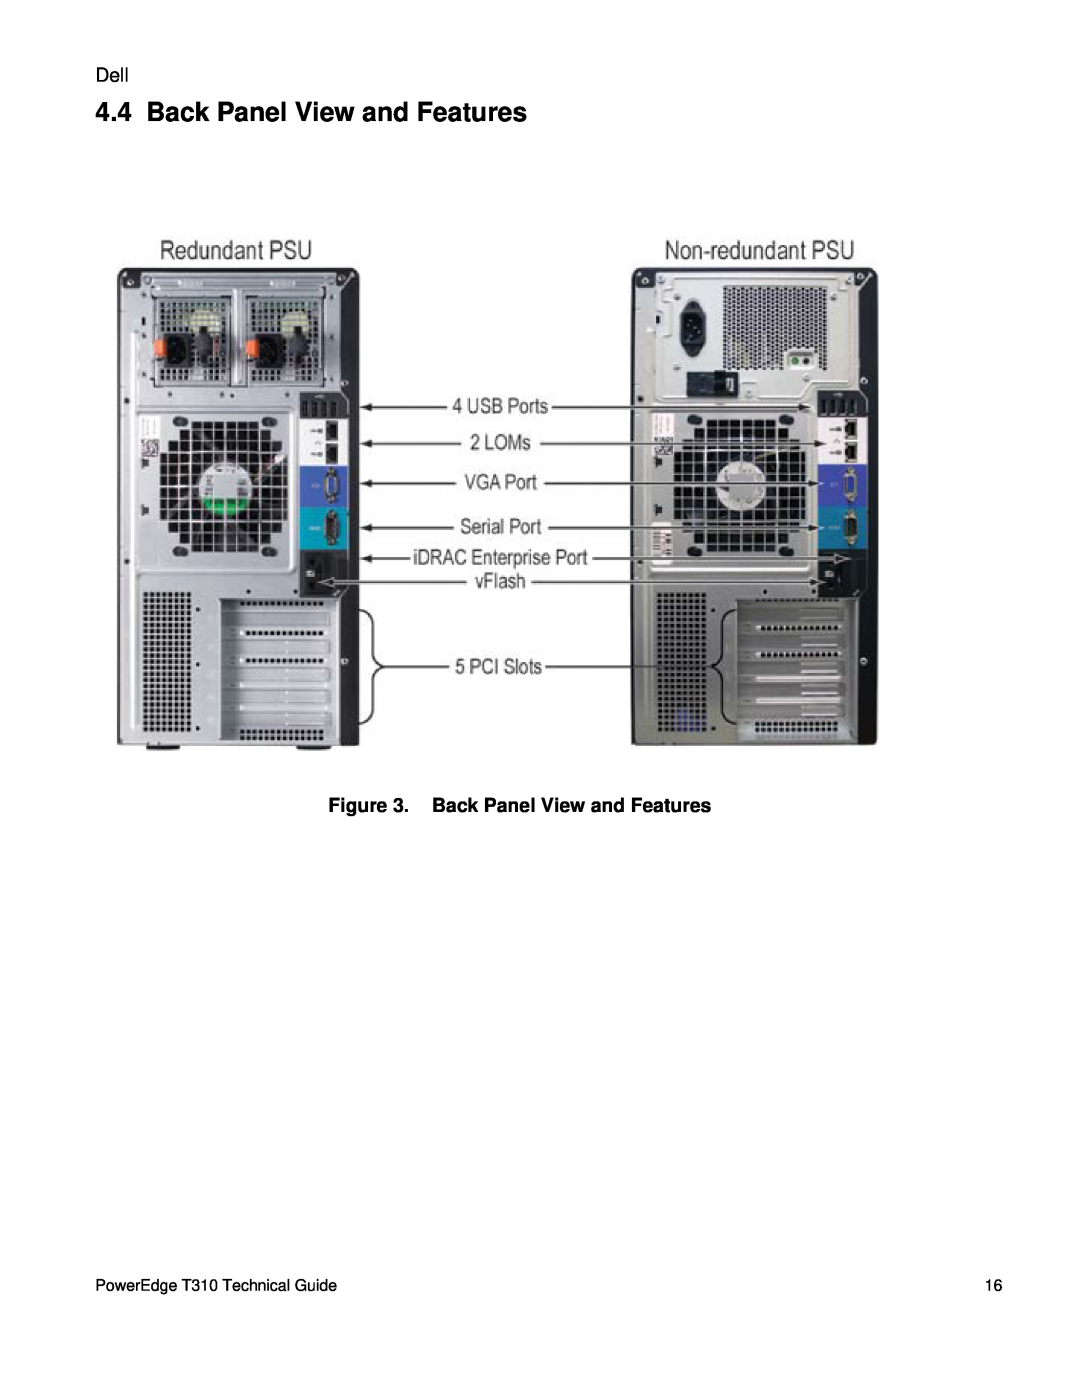 Dell manual Back Panel View and Features, PowerEdge T310 Technical Guide 